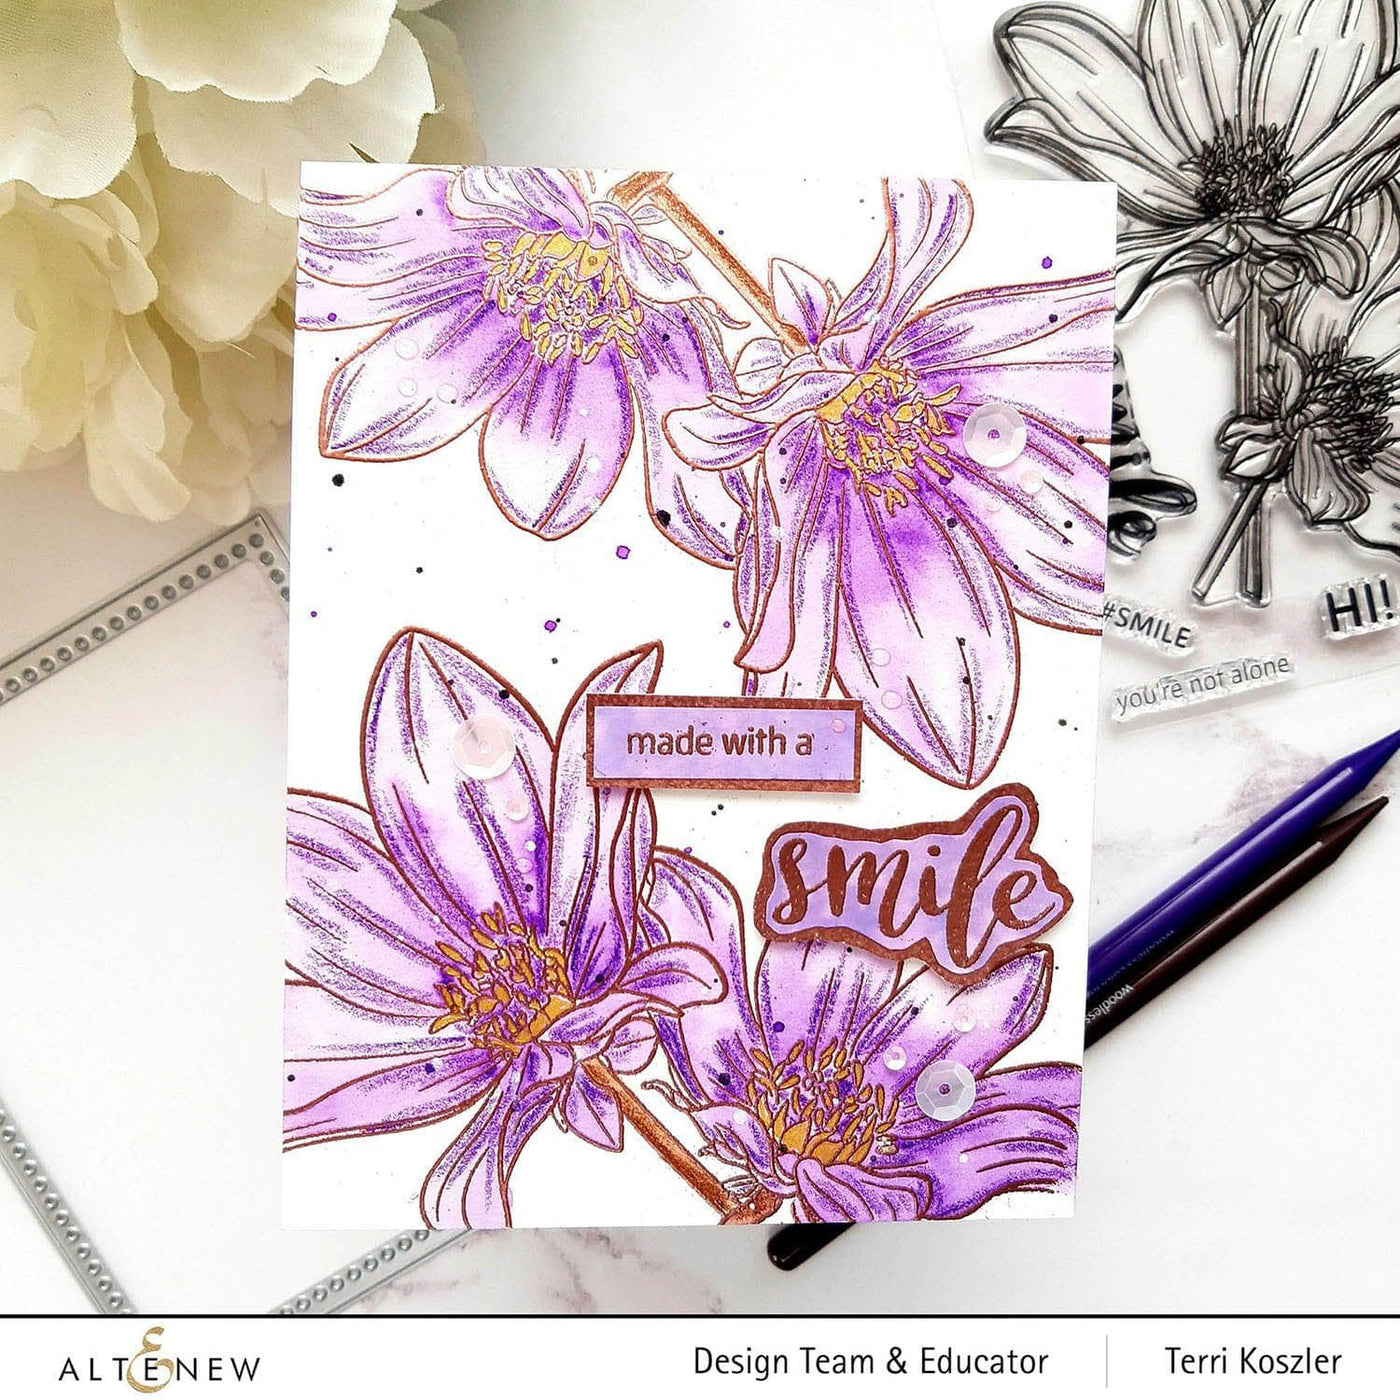 Photocentric Clear Stamps Paint-A-Flower: Dahlia Bright Eyes Outline Stamp Set